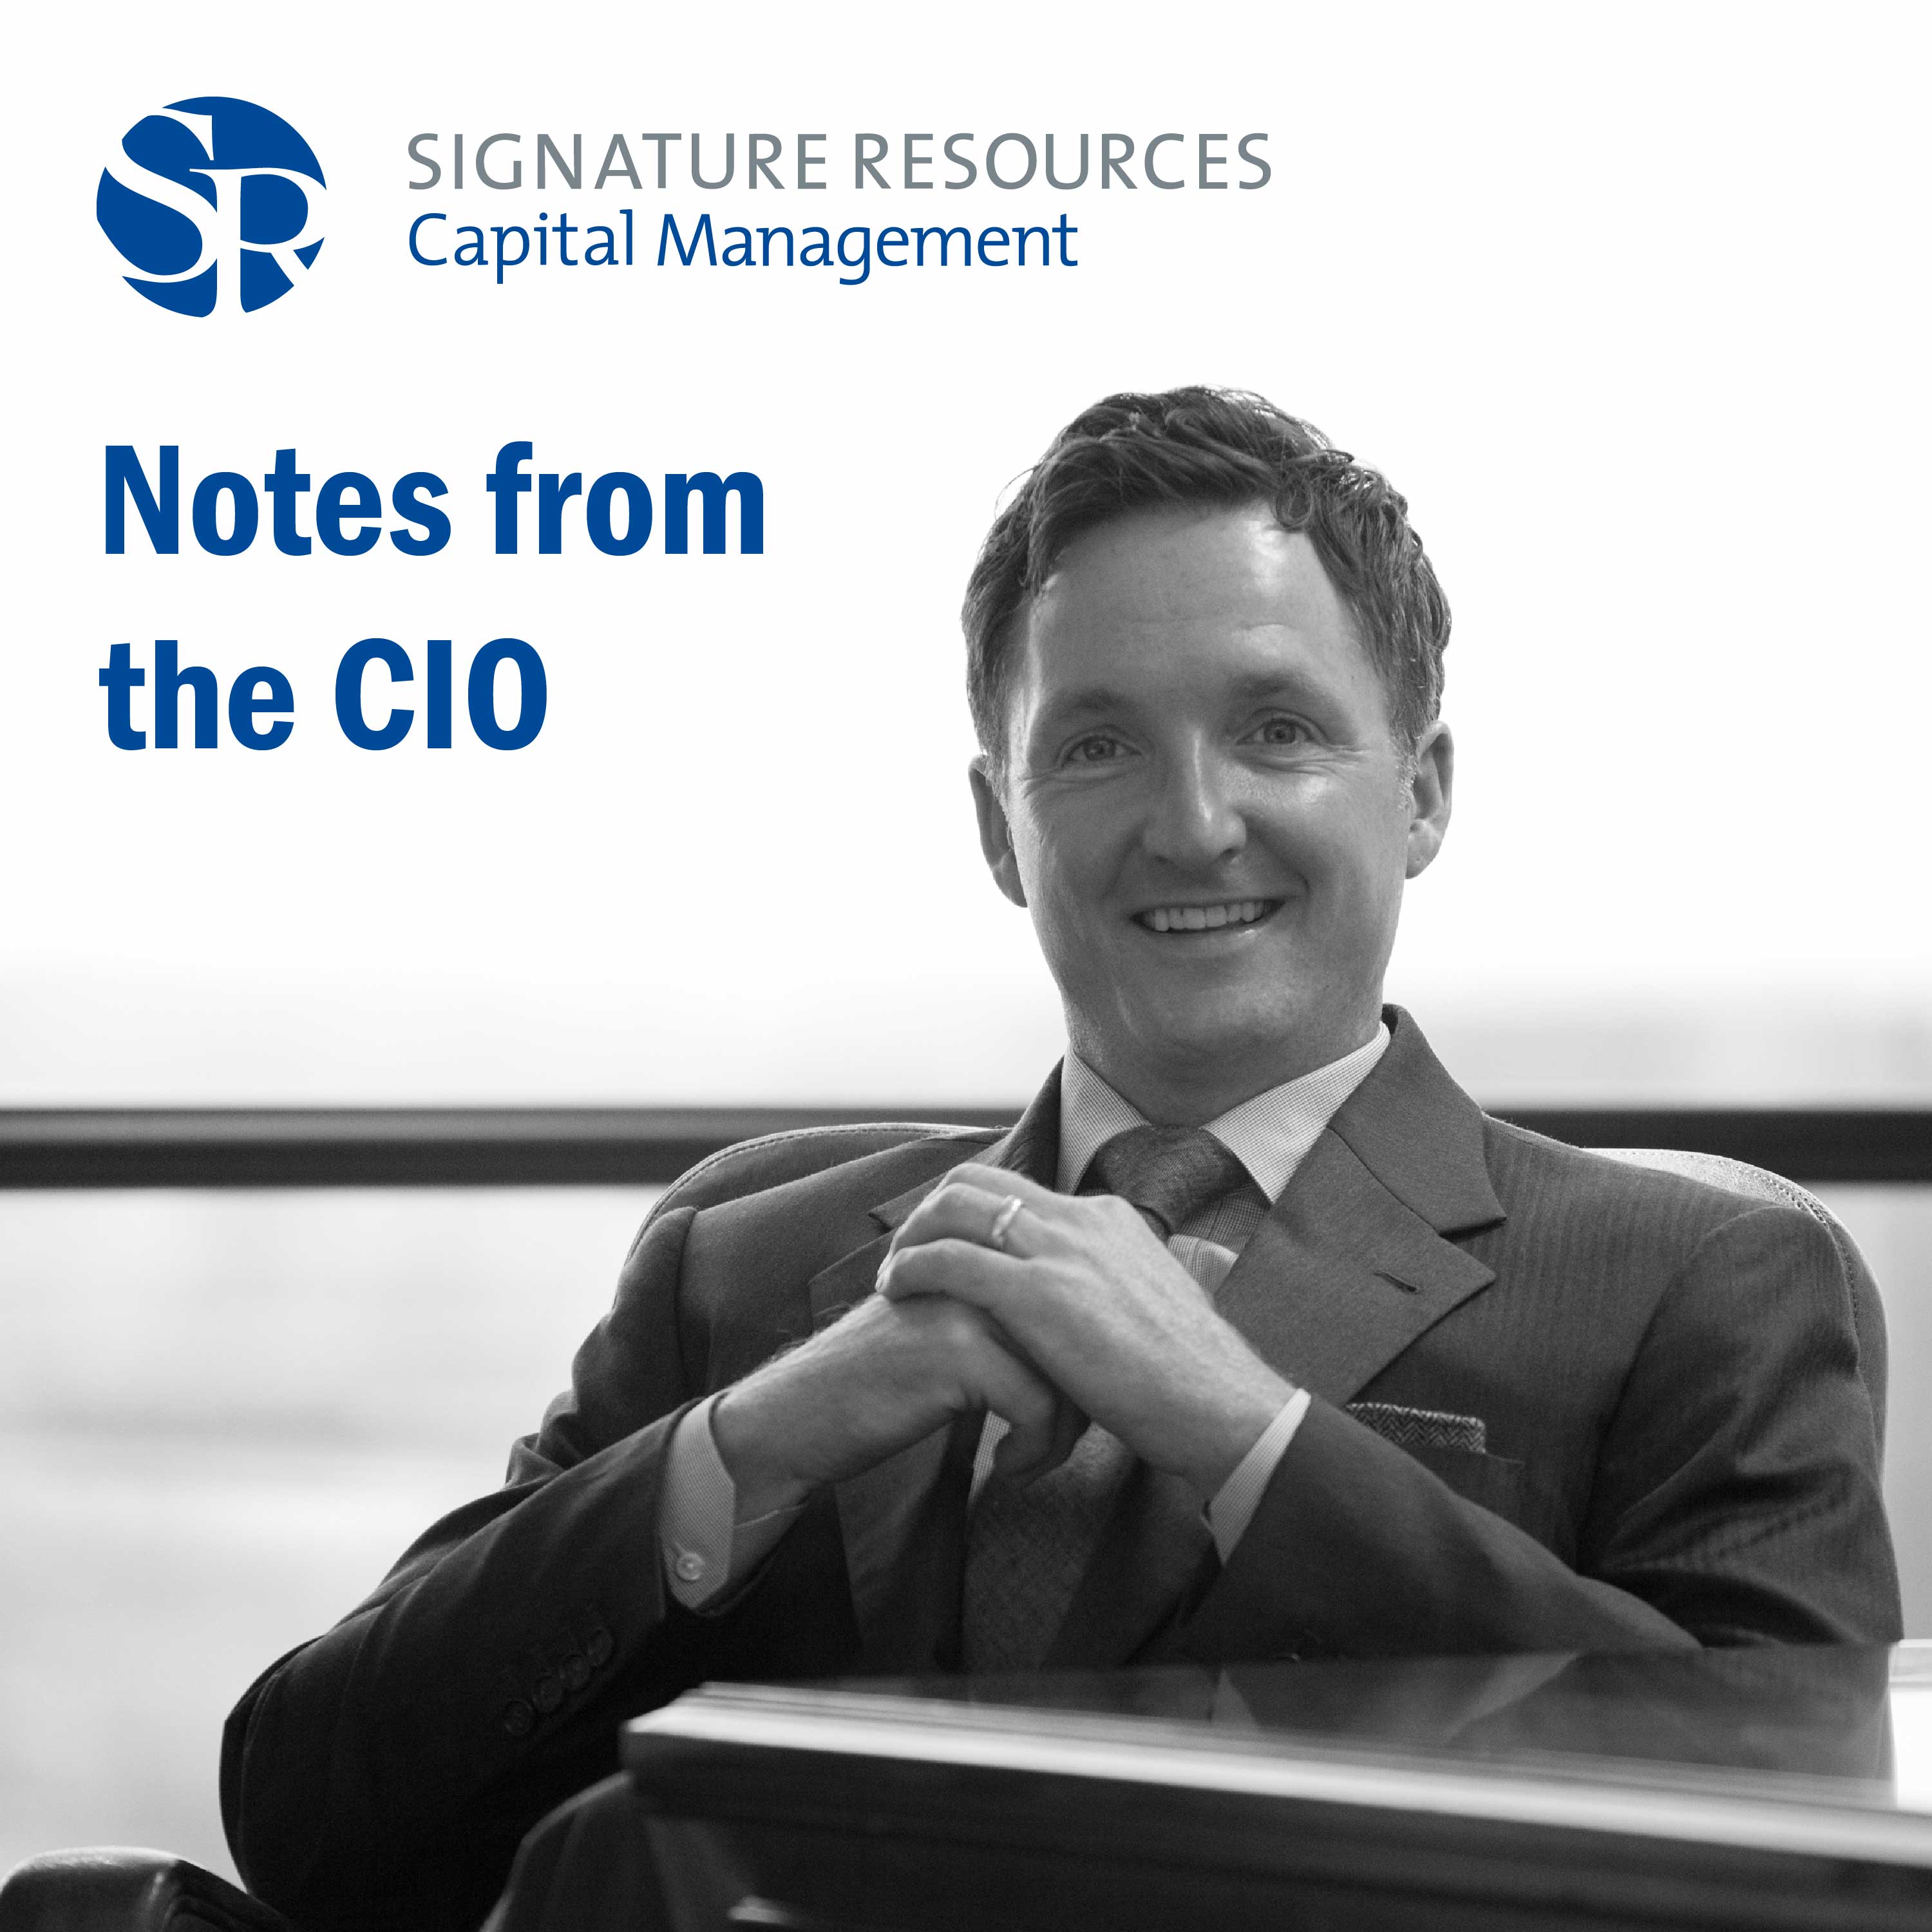 Notes from the CIO